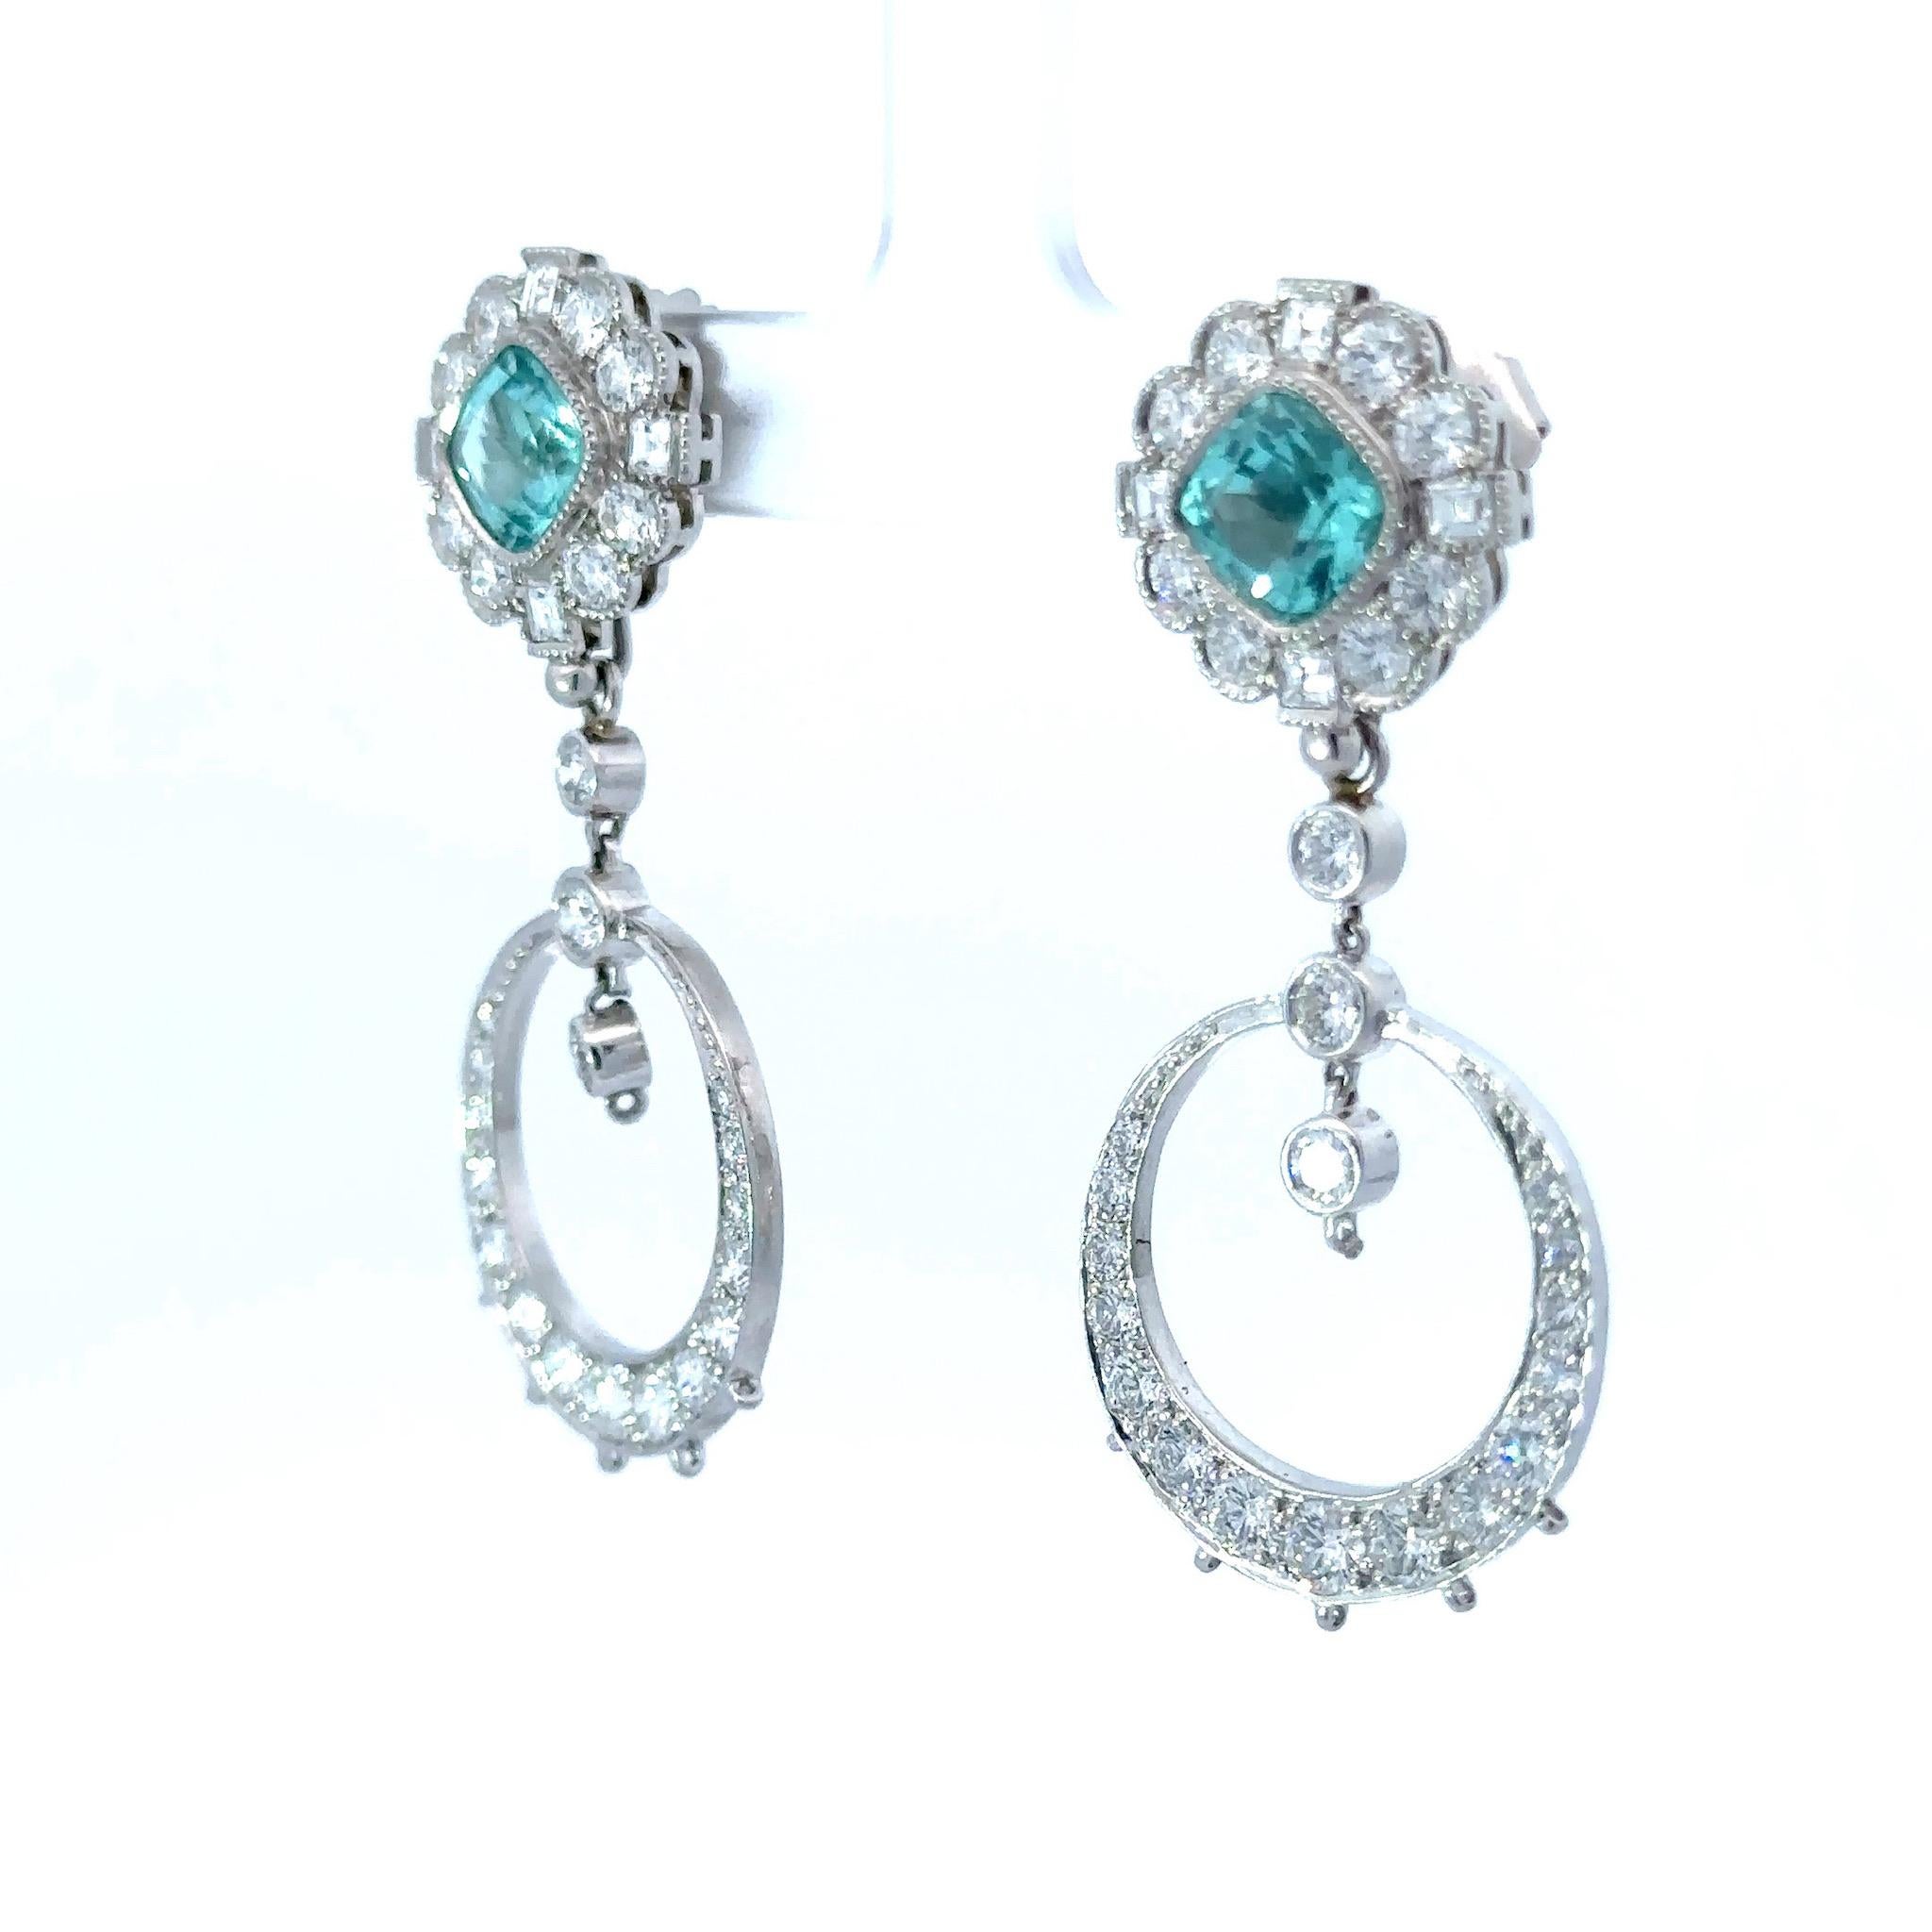 These stunning Paraiba & Diamond earrings set in Platinum are not only rare - the design and meticulous craftsmanship makes them one of a kind. When desired, the earrings can be an extravagant and glamorous pair of dangle earrings with a diamond